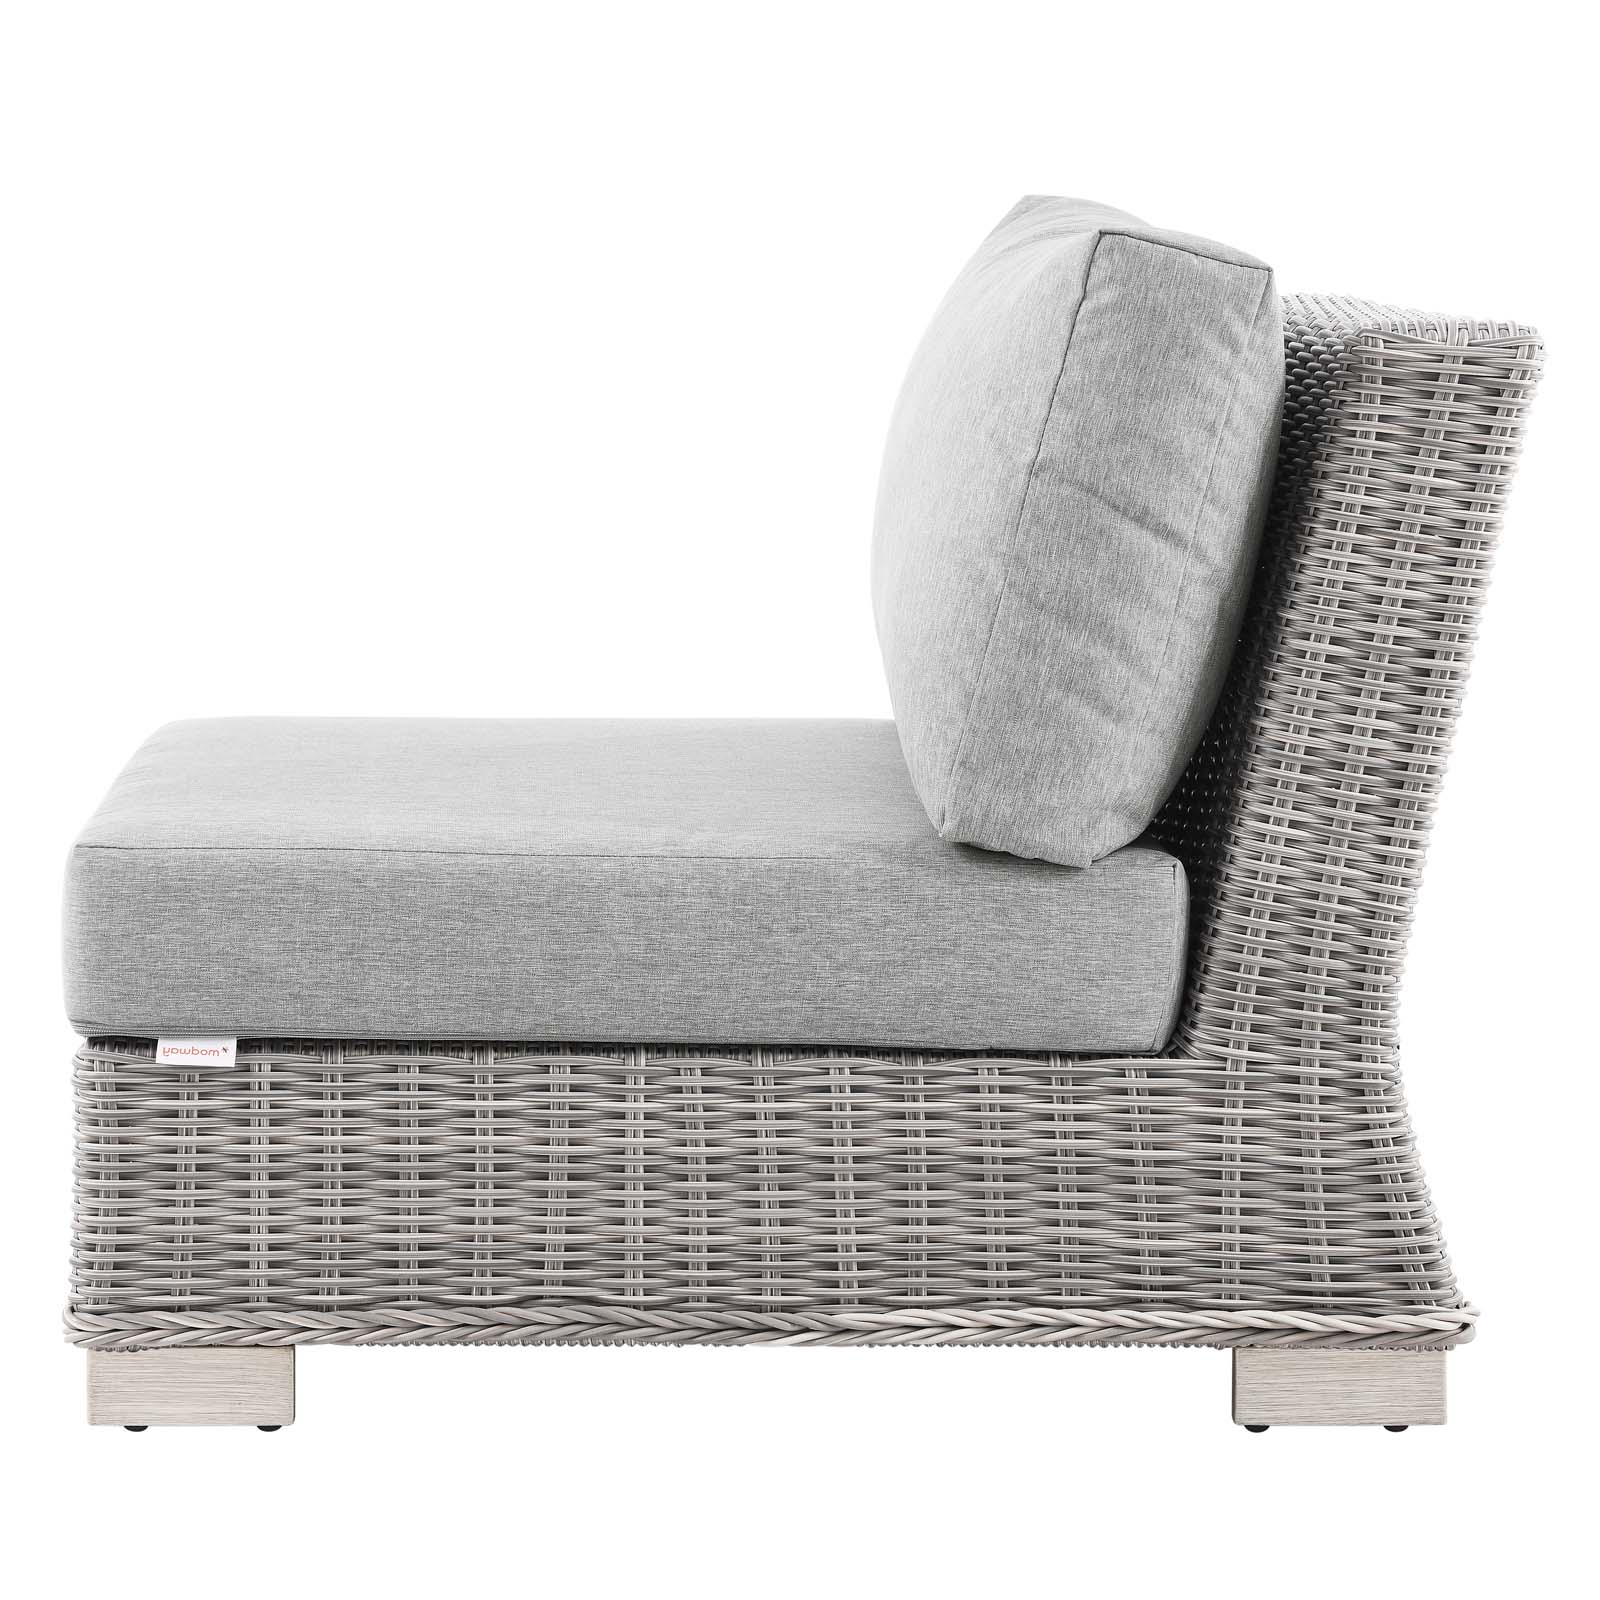 Lounge Sectional Sofa Chair Table Set, Rattan, Wicker, Grey Gray, Modern Contemporary Urban Design, Outdoor Patio Balcony Cafe Bistro Garden Furniture Hotel Hospitality - image 4 of 10